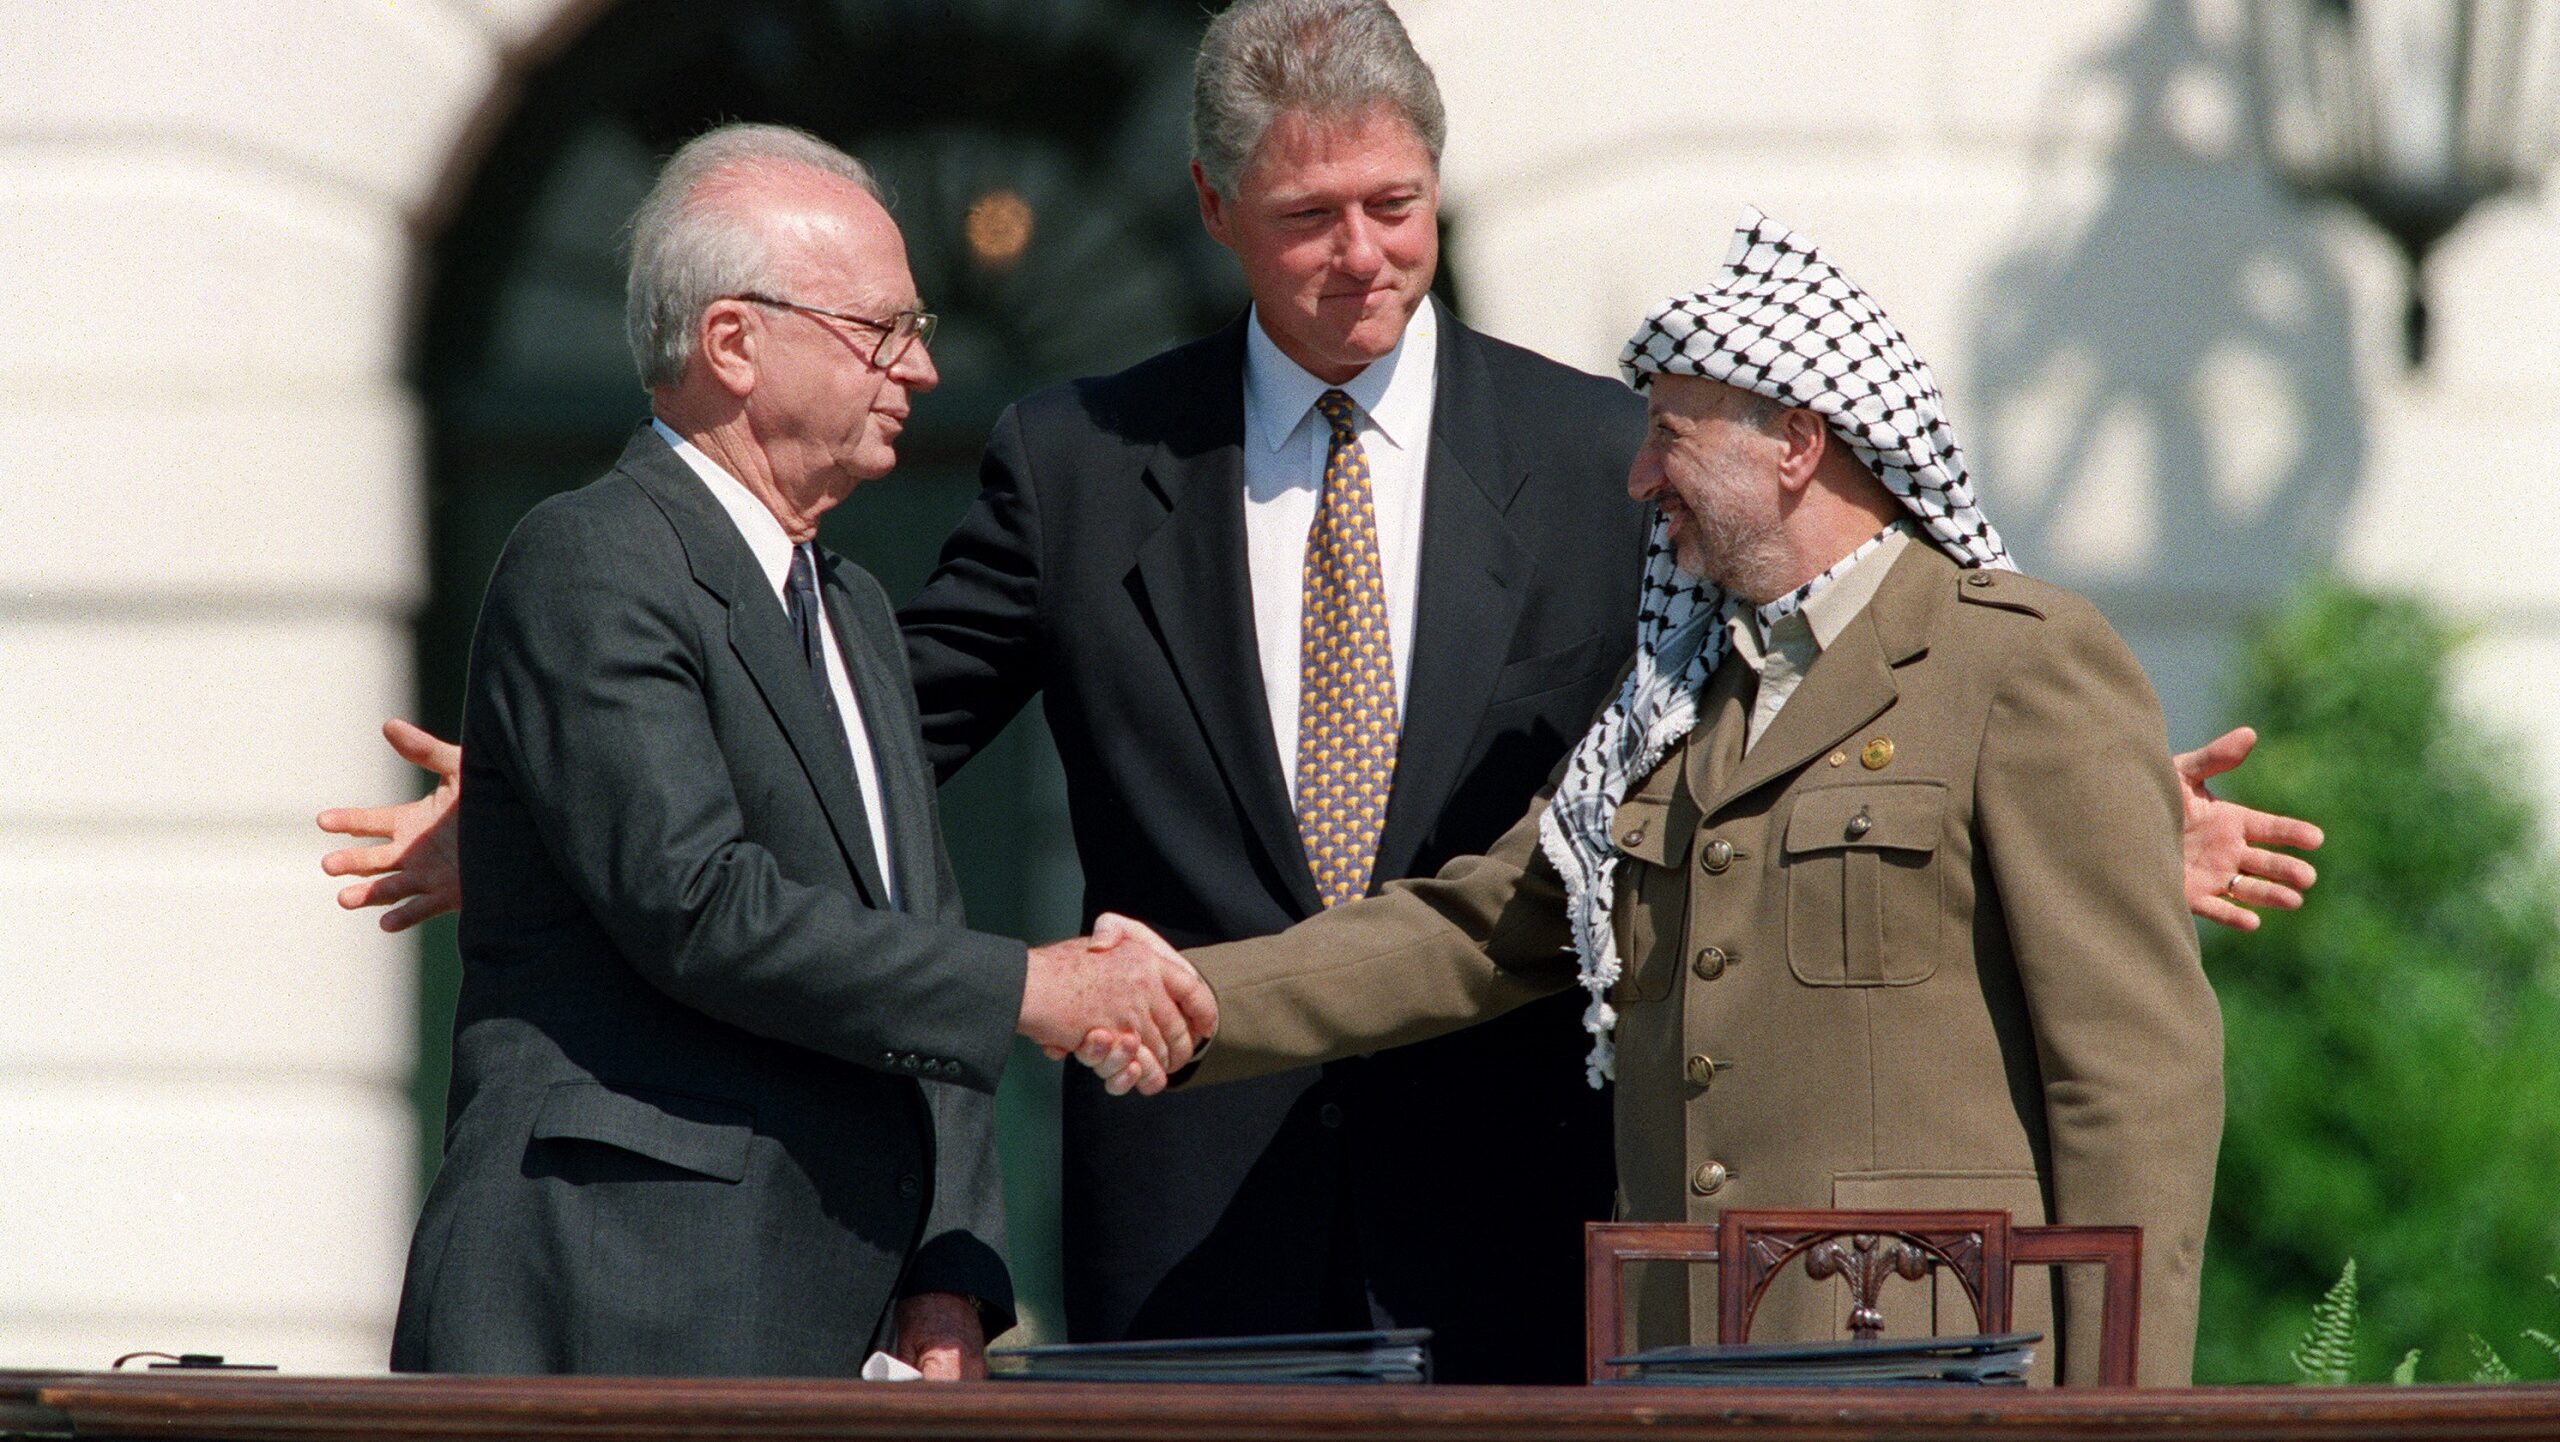 30 Years Later: Failures and Lessons Learned From the Oslo Accords